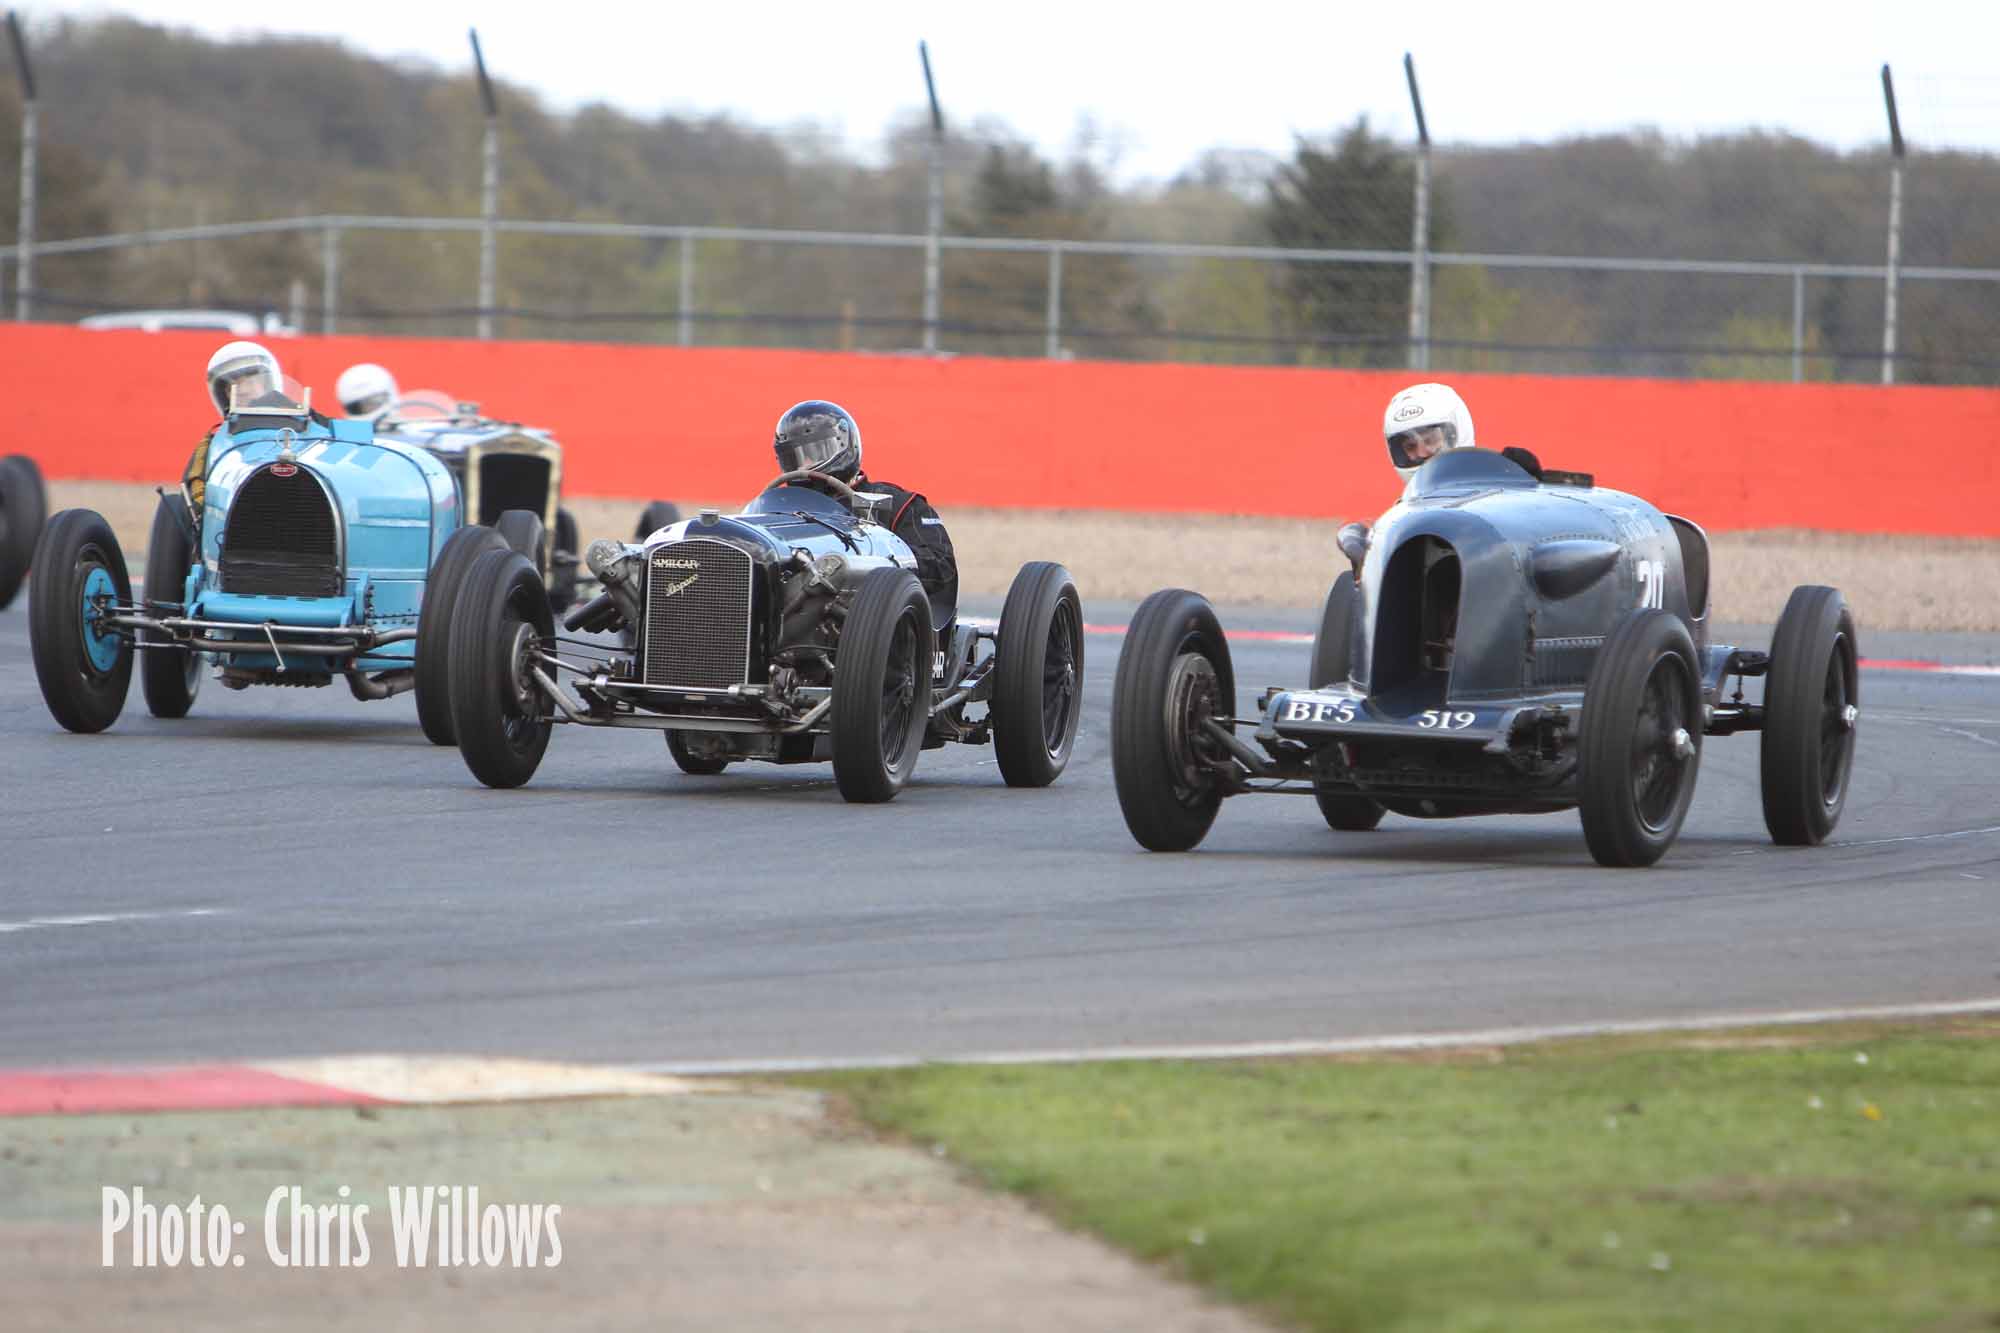 Last Call for Entries for Formula Vintage – Round 1 at Silverstone - Closing Today! cover